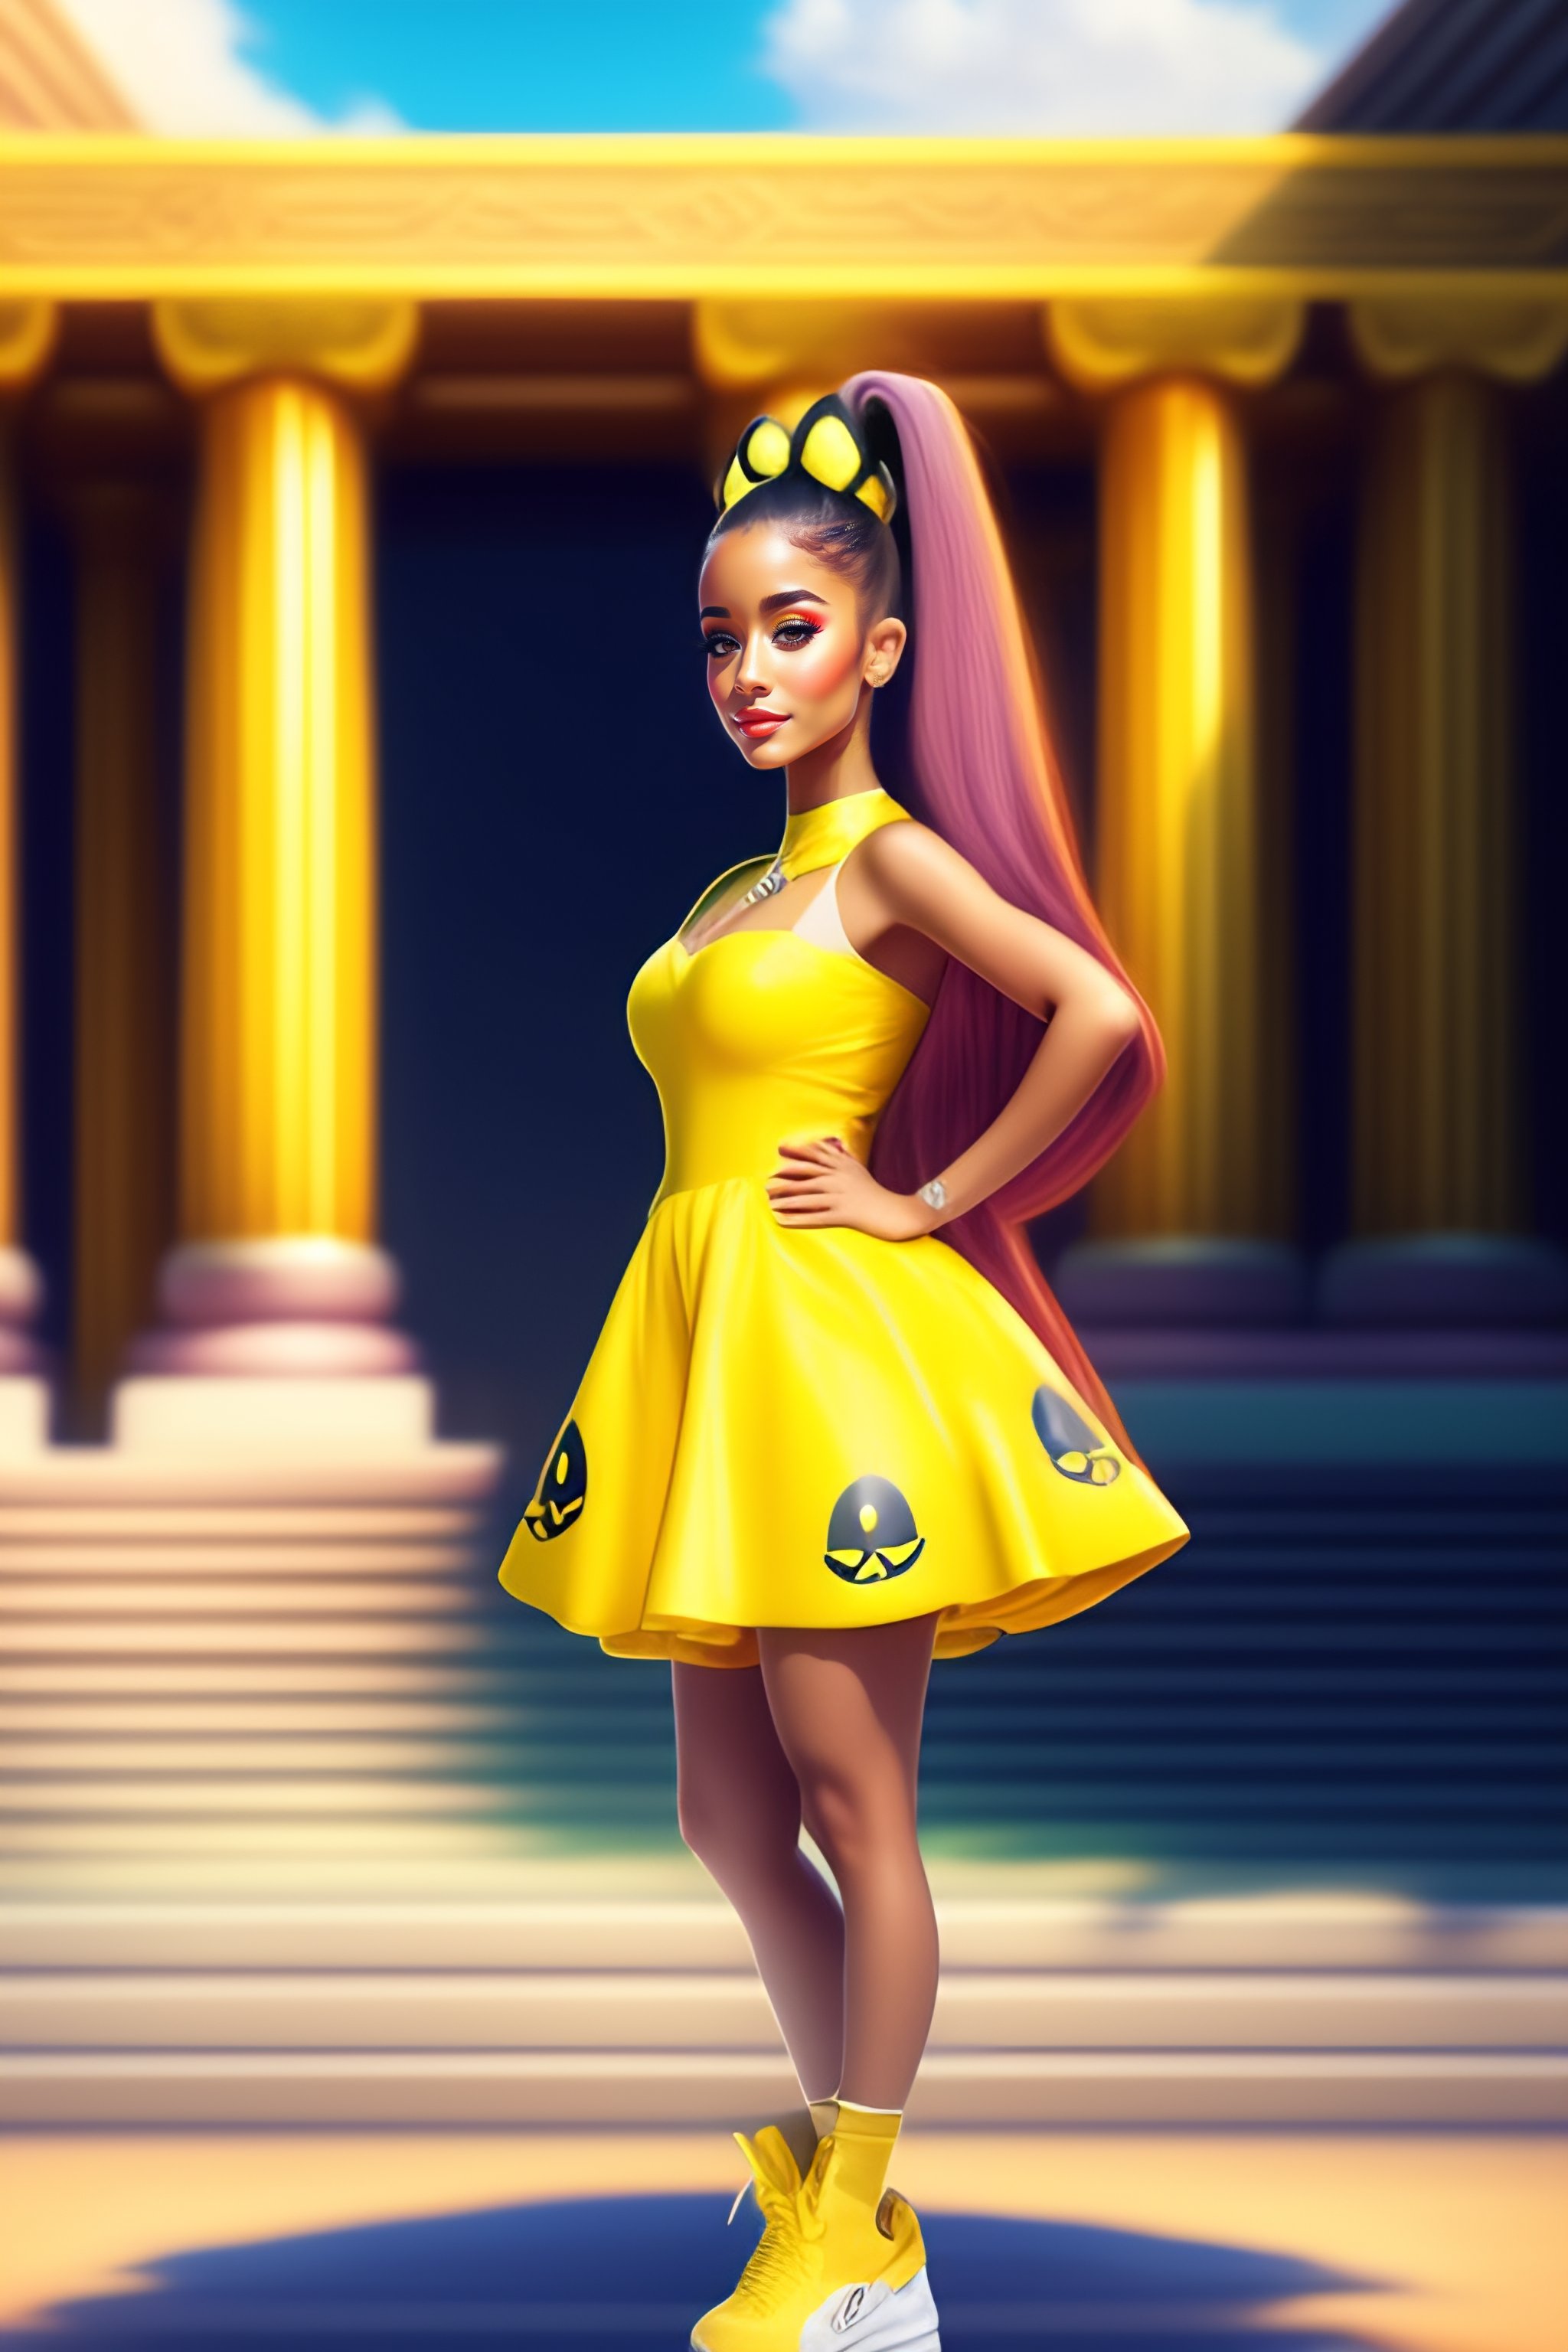 clayton miles recommends ariana grande yellow dress pic